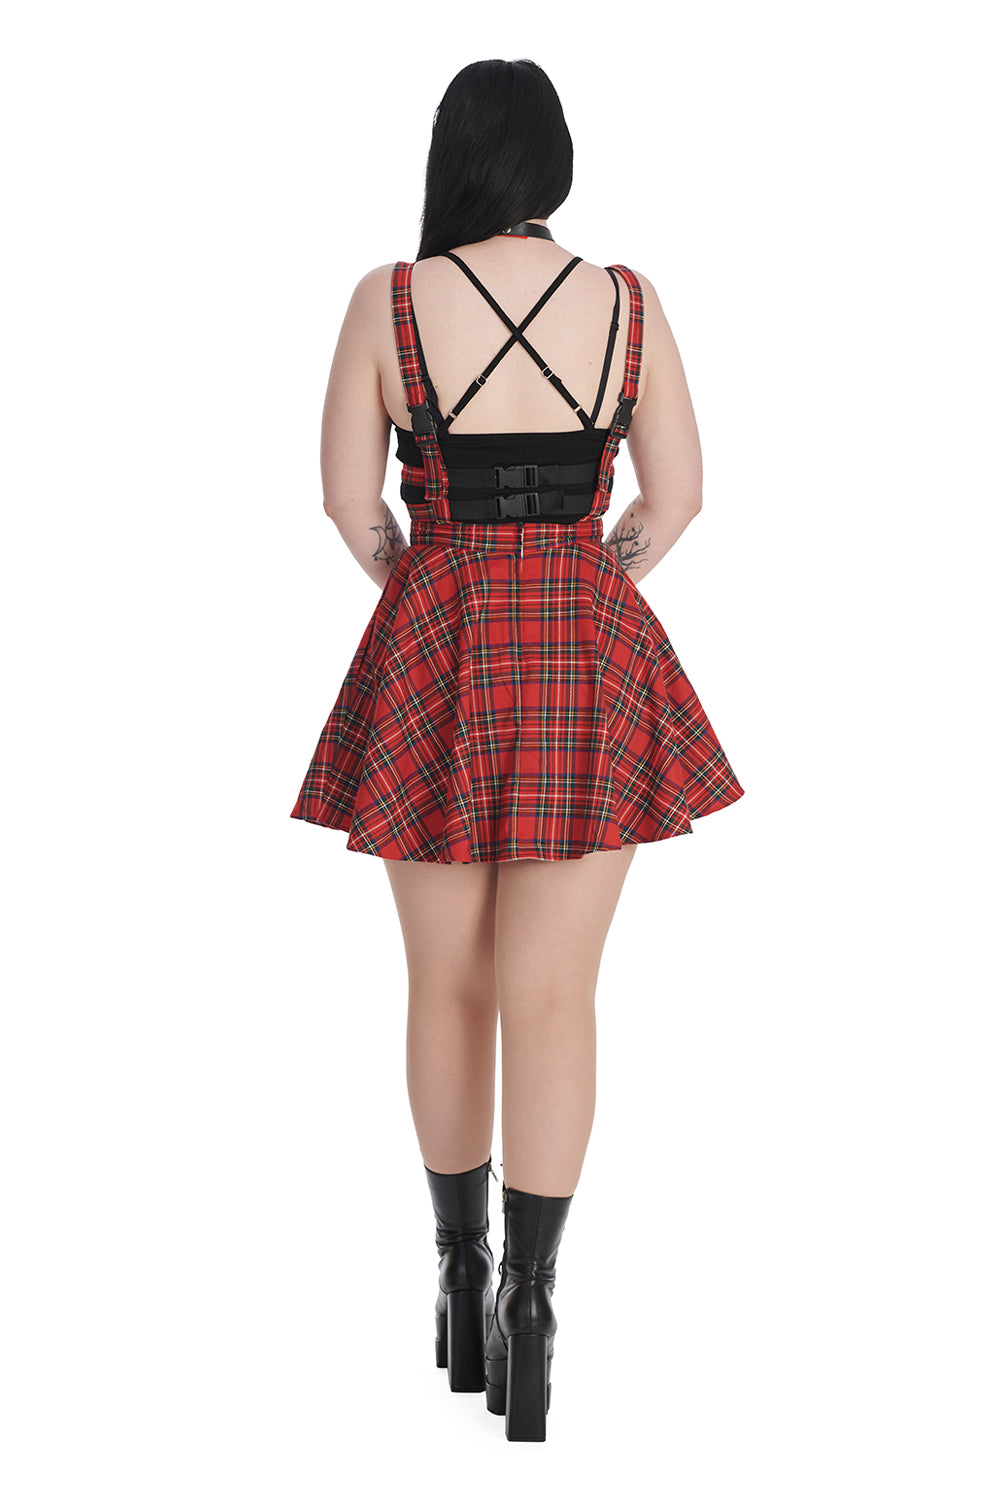 Banned Lolita Skater Skirt with Straps and Pockets in Red Tartan - Kate's Clothing